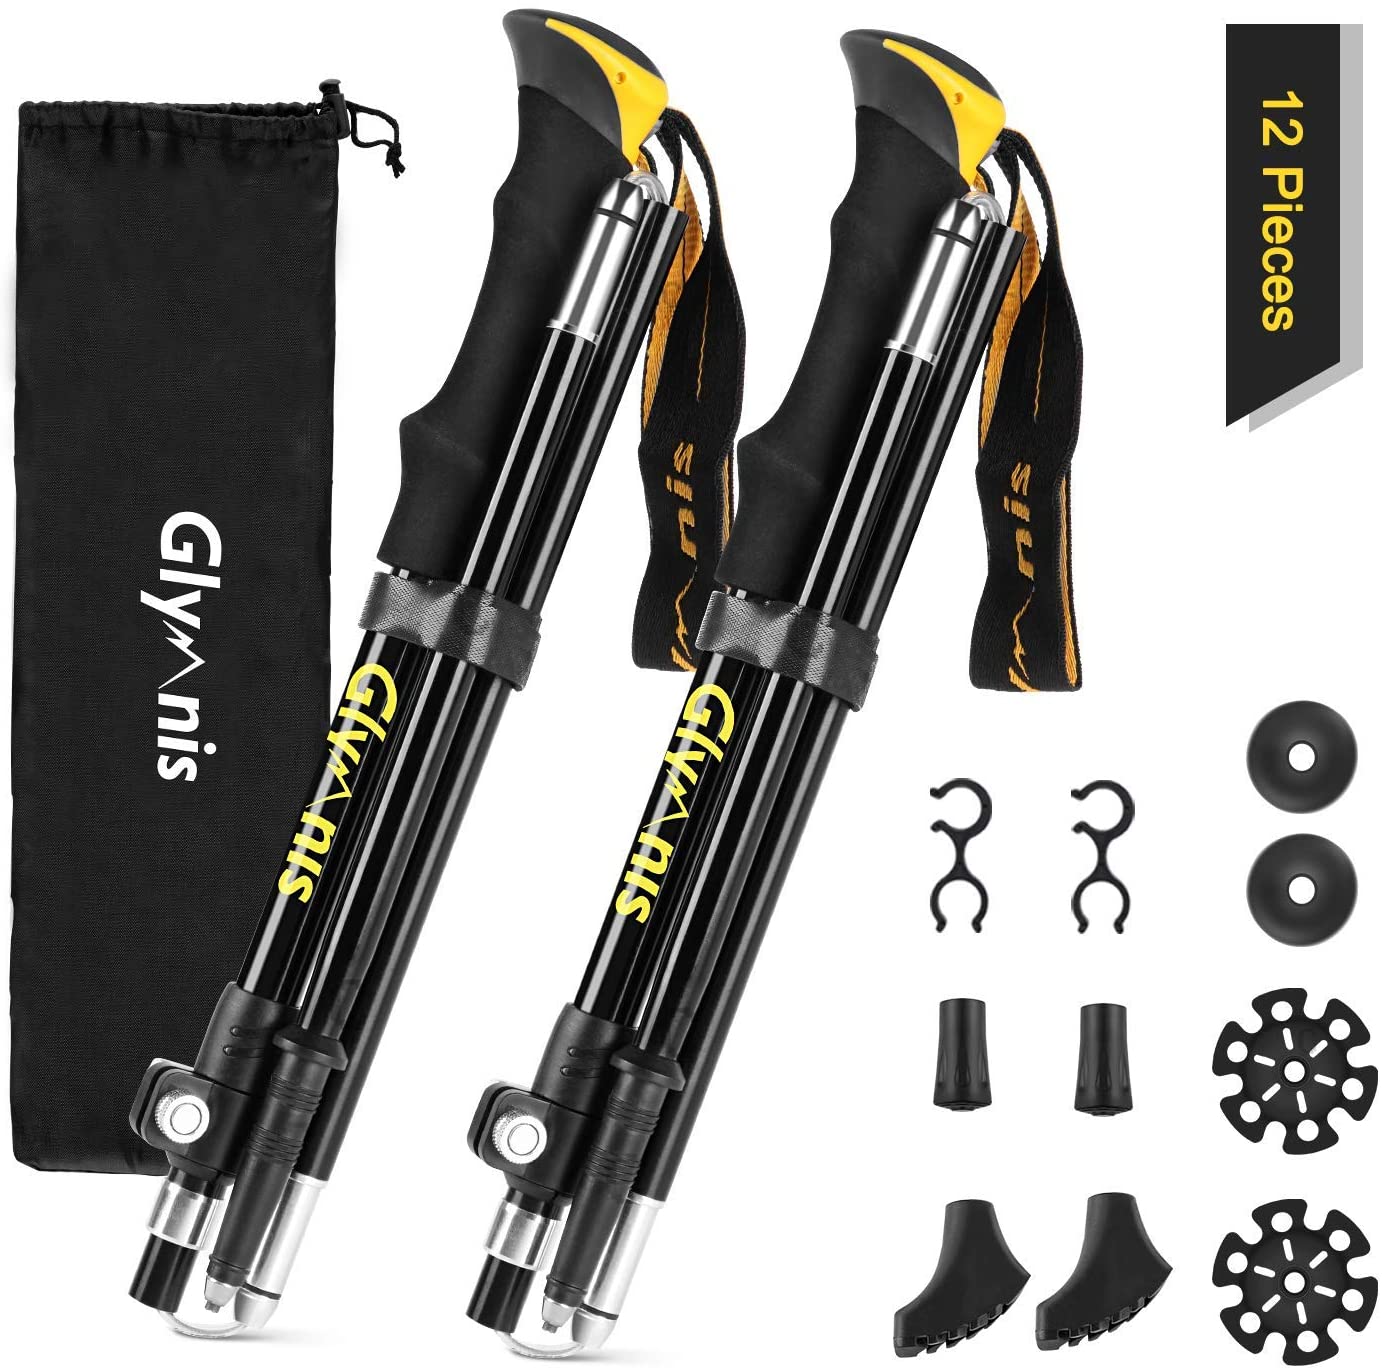 Glymnis Collapsible Hiking Poles